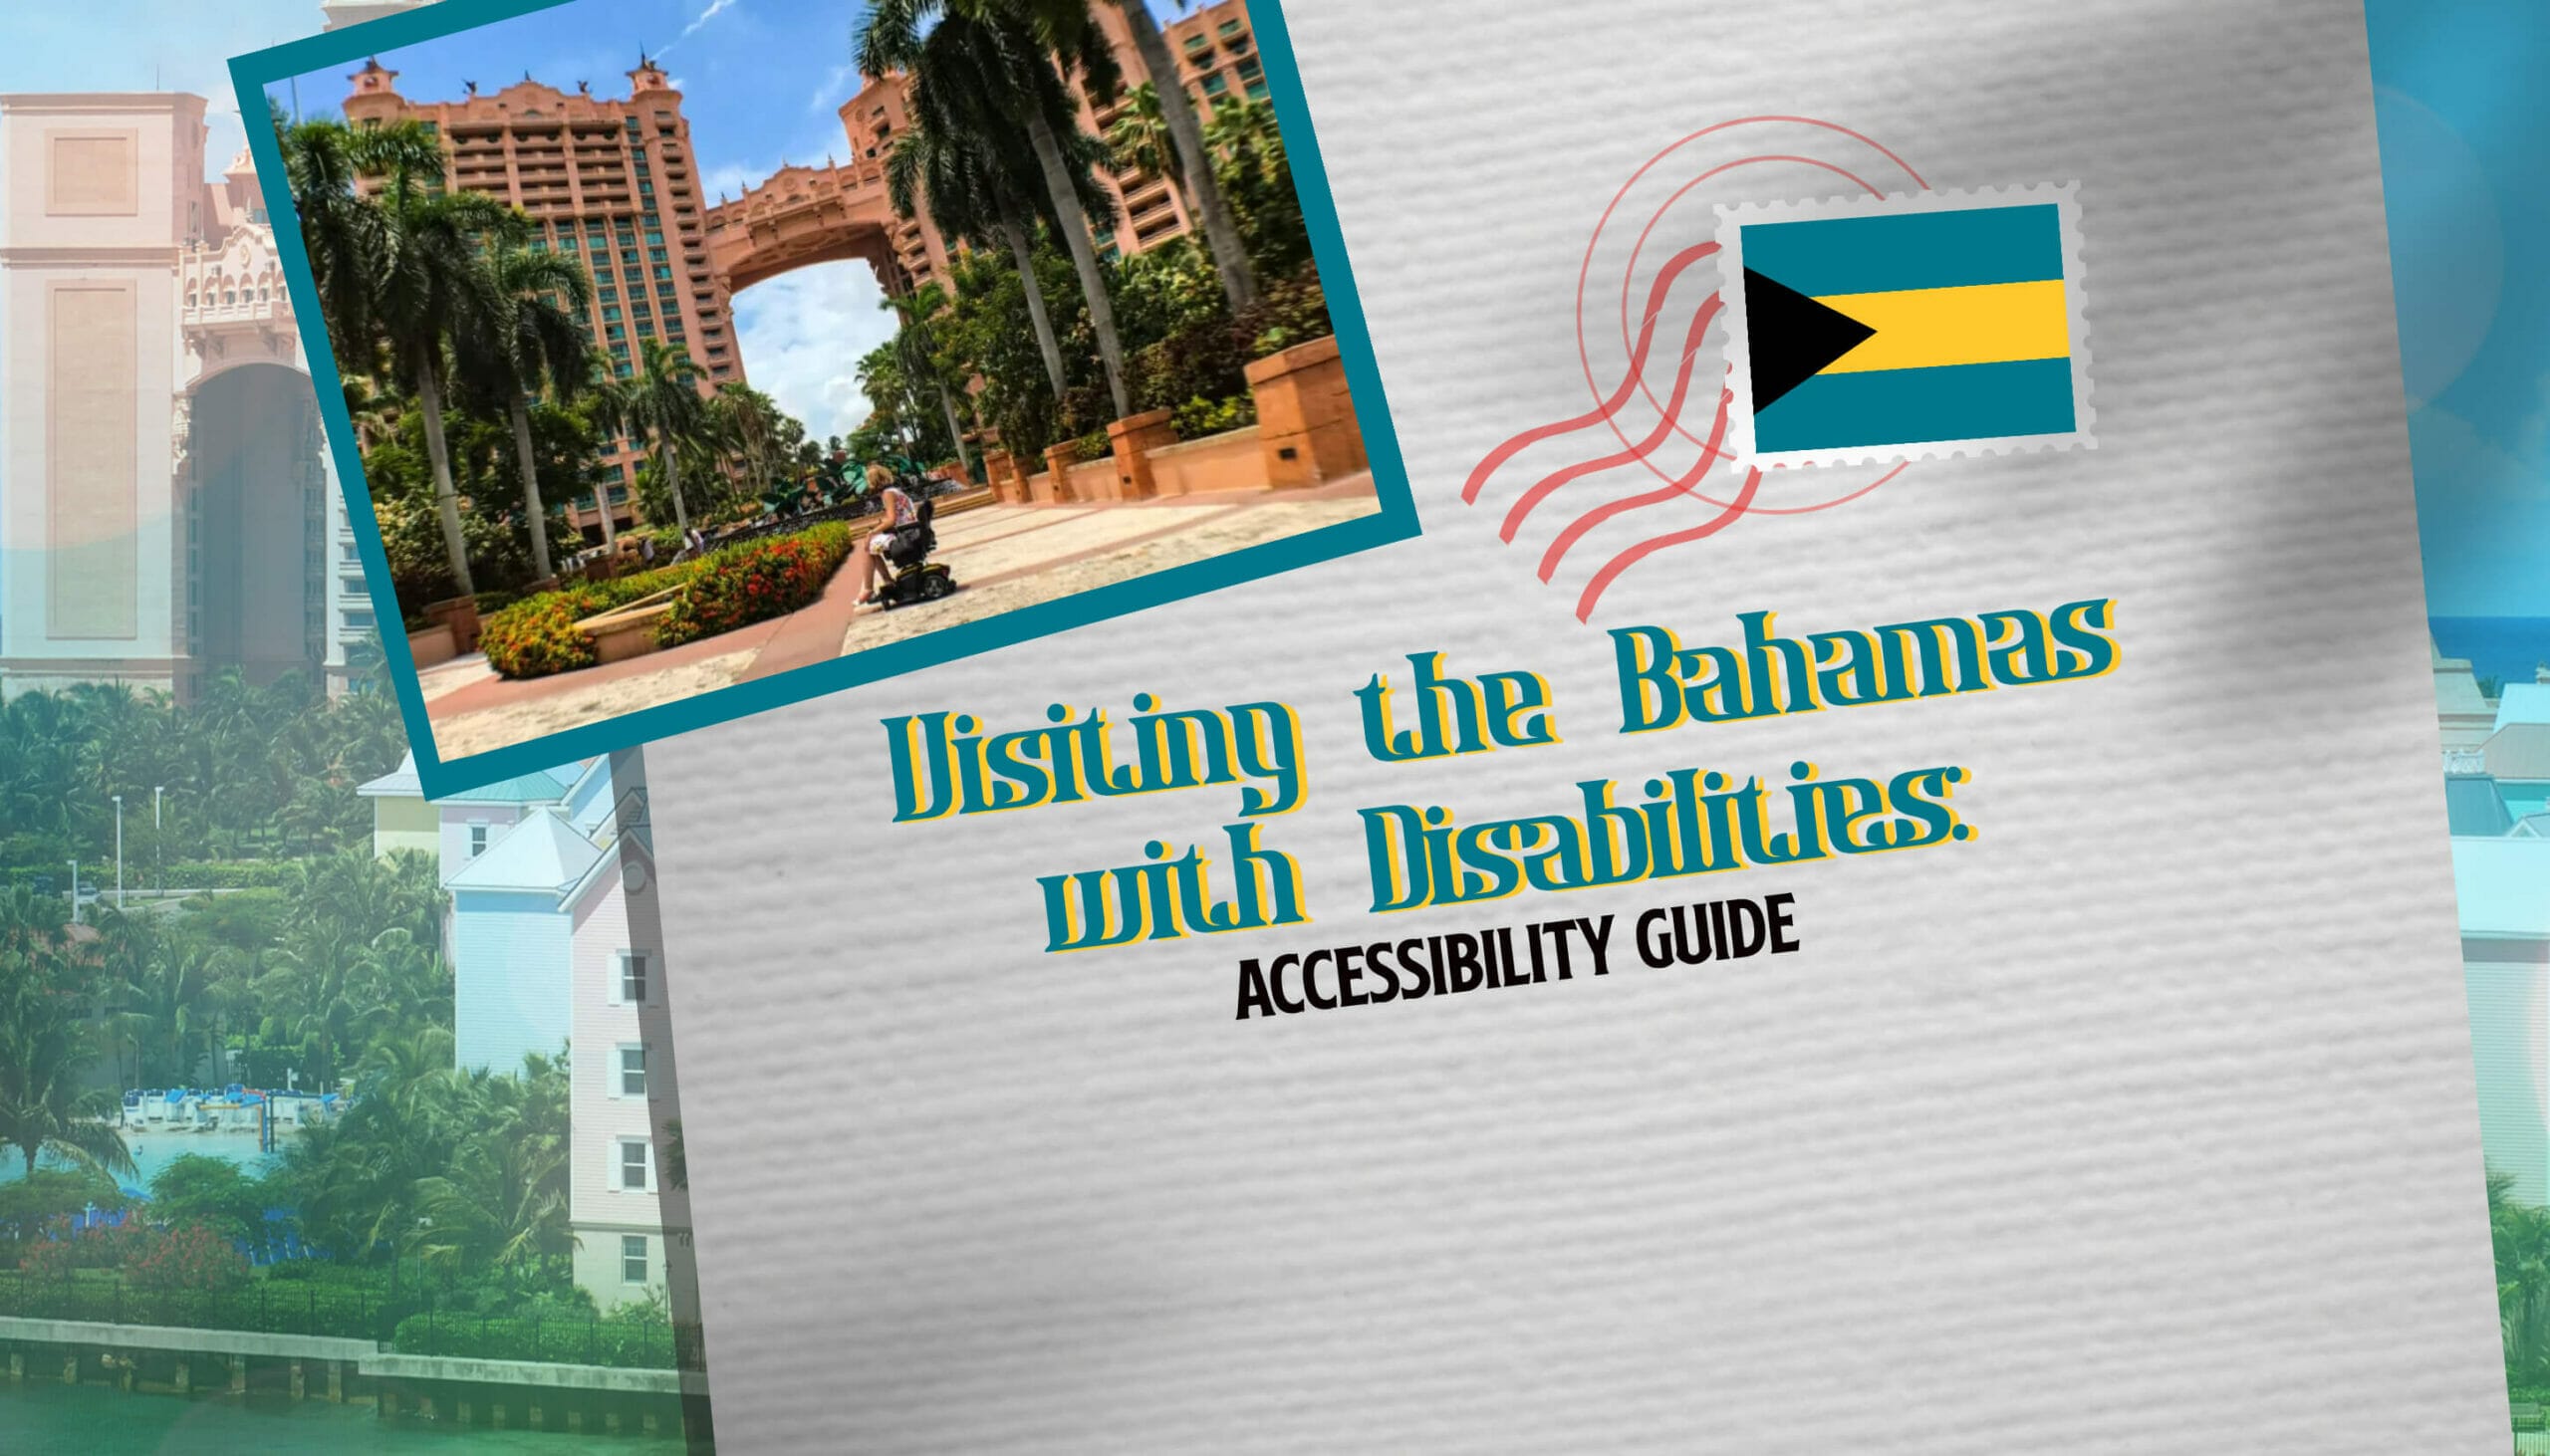 Visiting the Bahamas with Disabilities Accessibility Guide